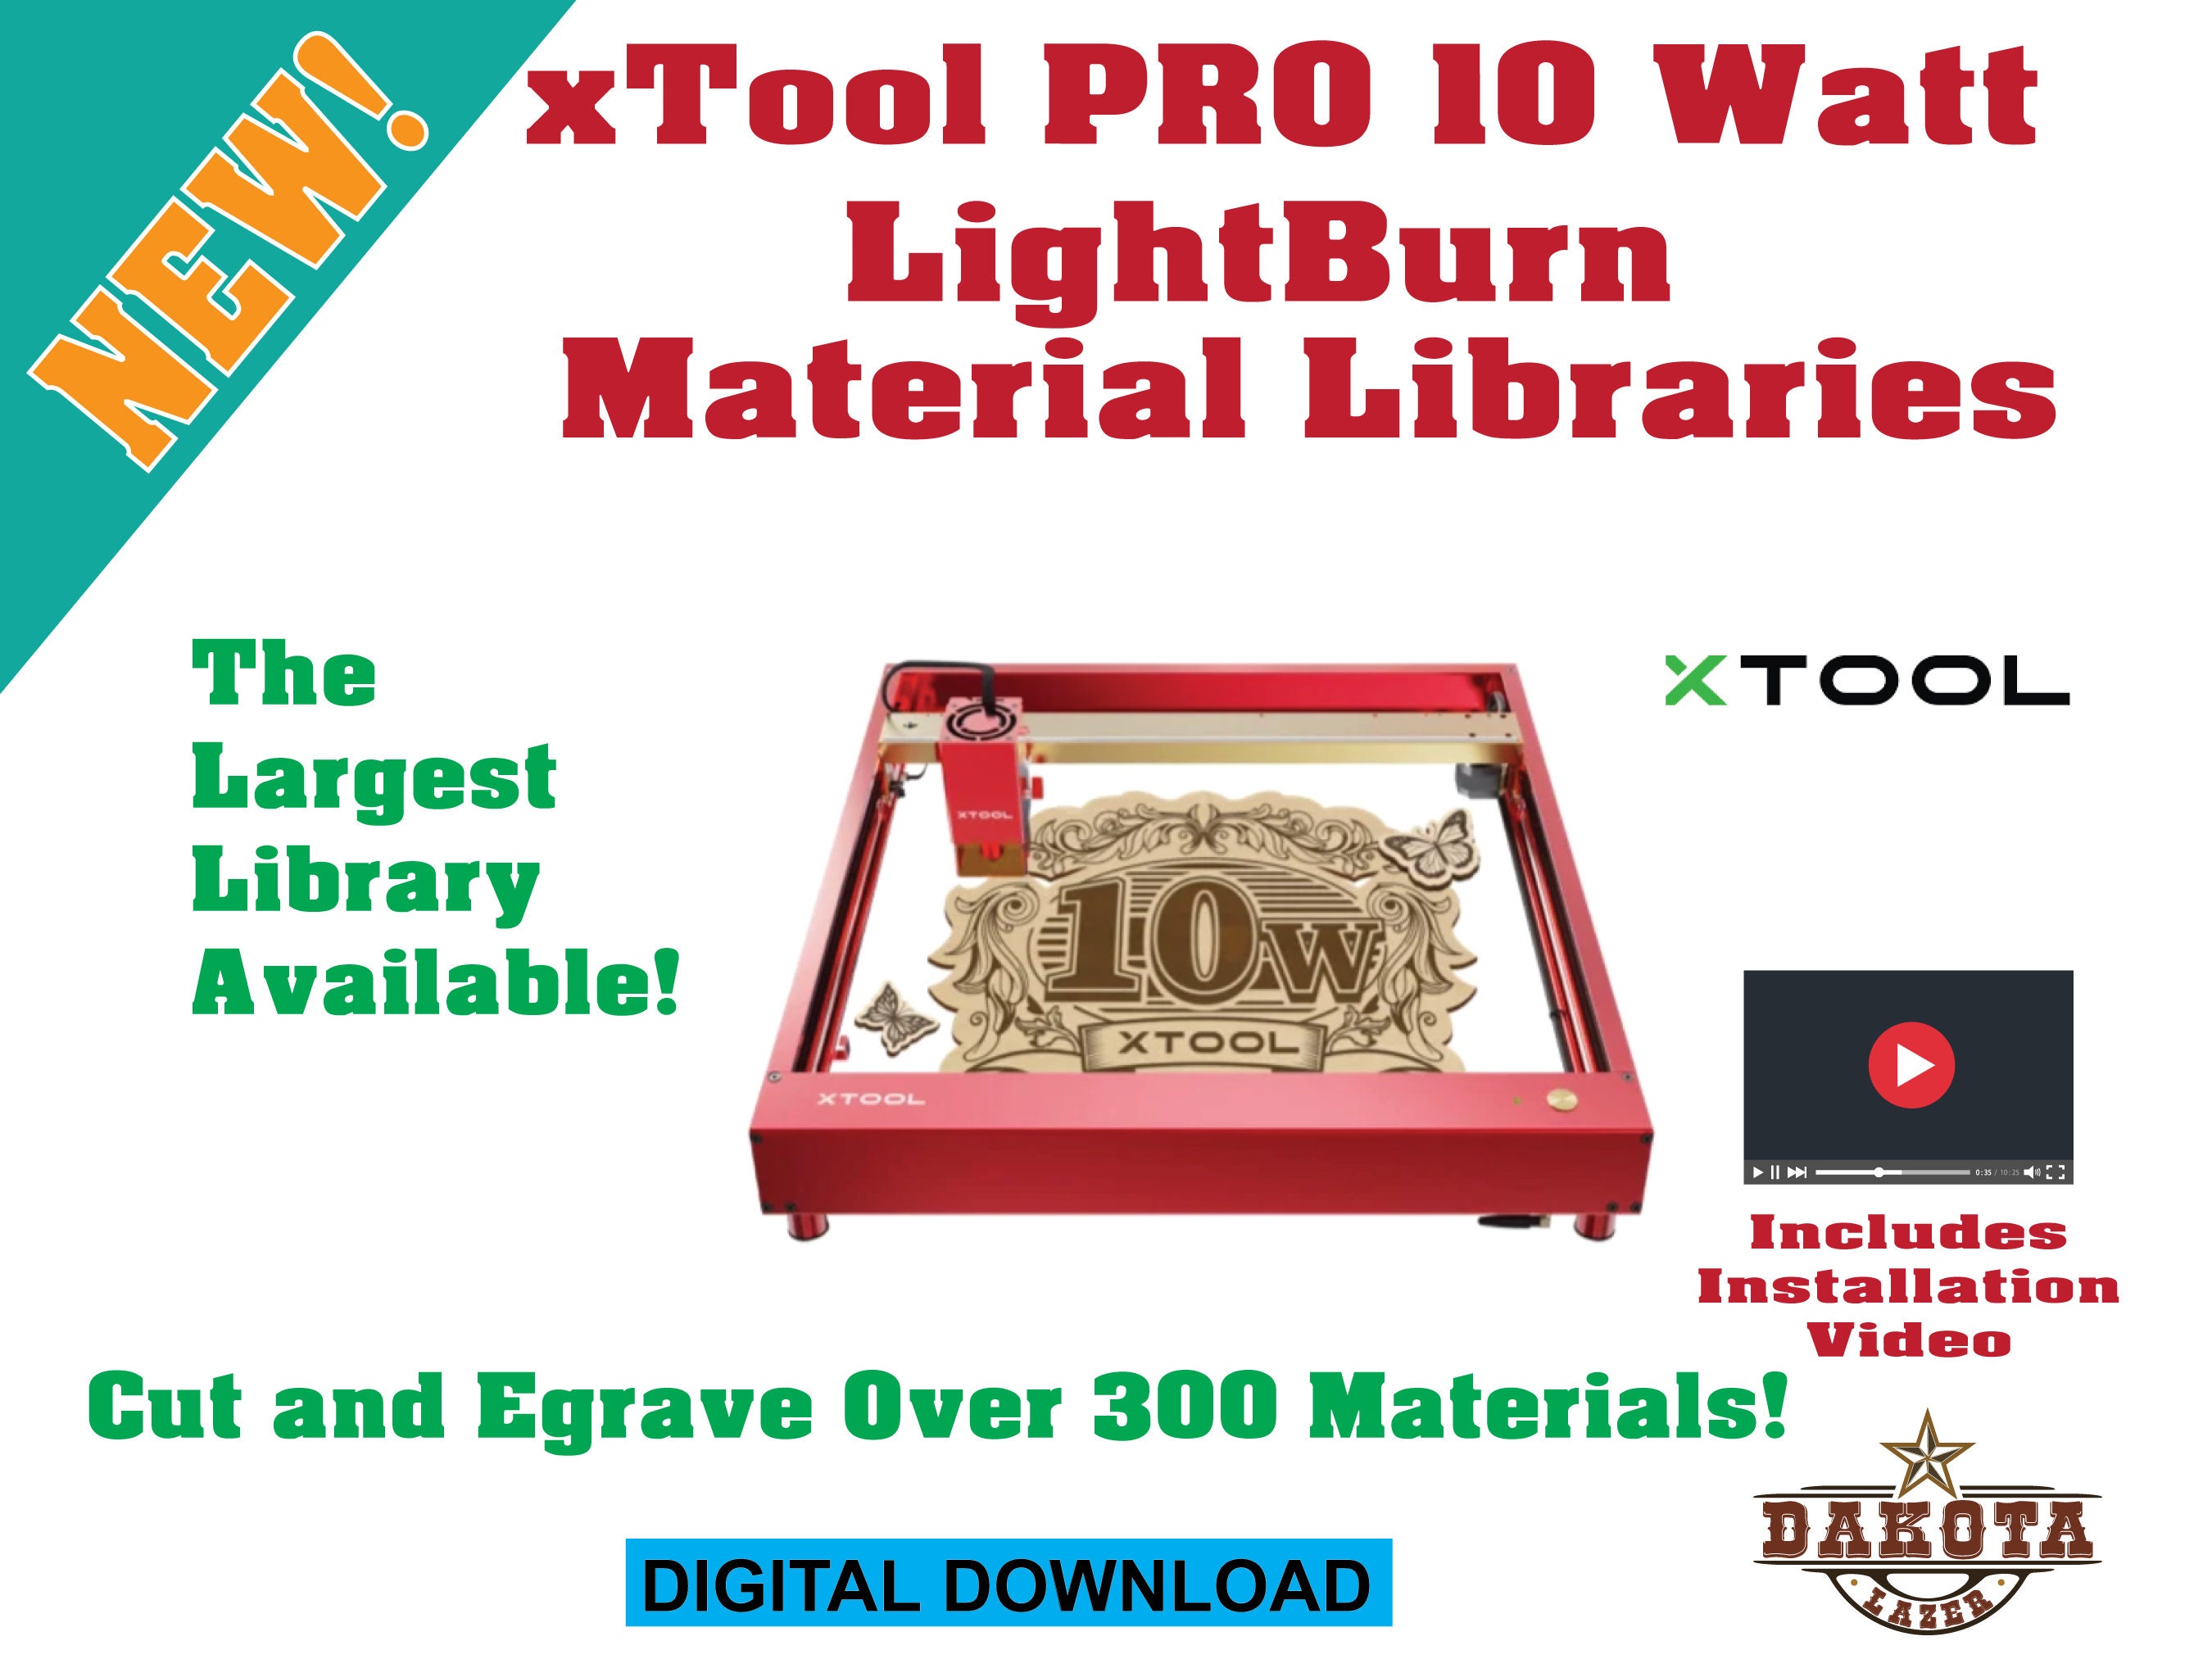 xTool Laser Material Explore Kit, 8 Kinds of Laser Engraving Materials,  Upgraded Materials and Tools Bundle for Beginners, Pros, Laser Materials  for